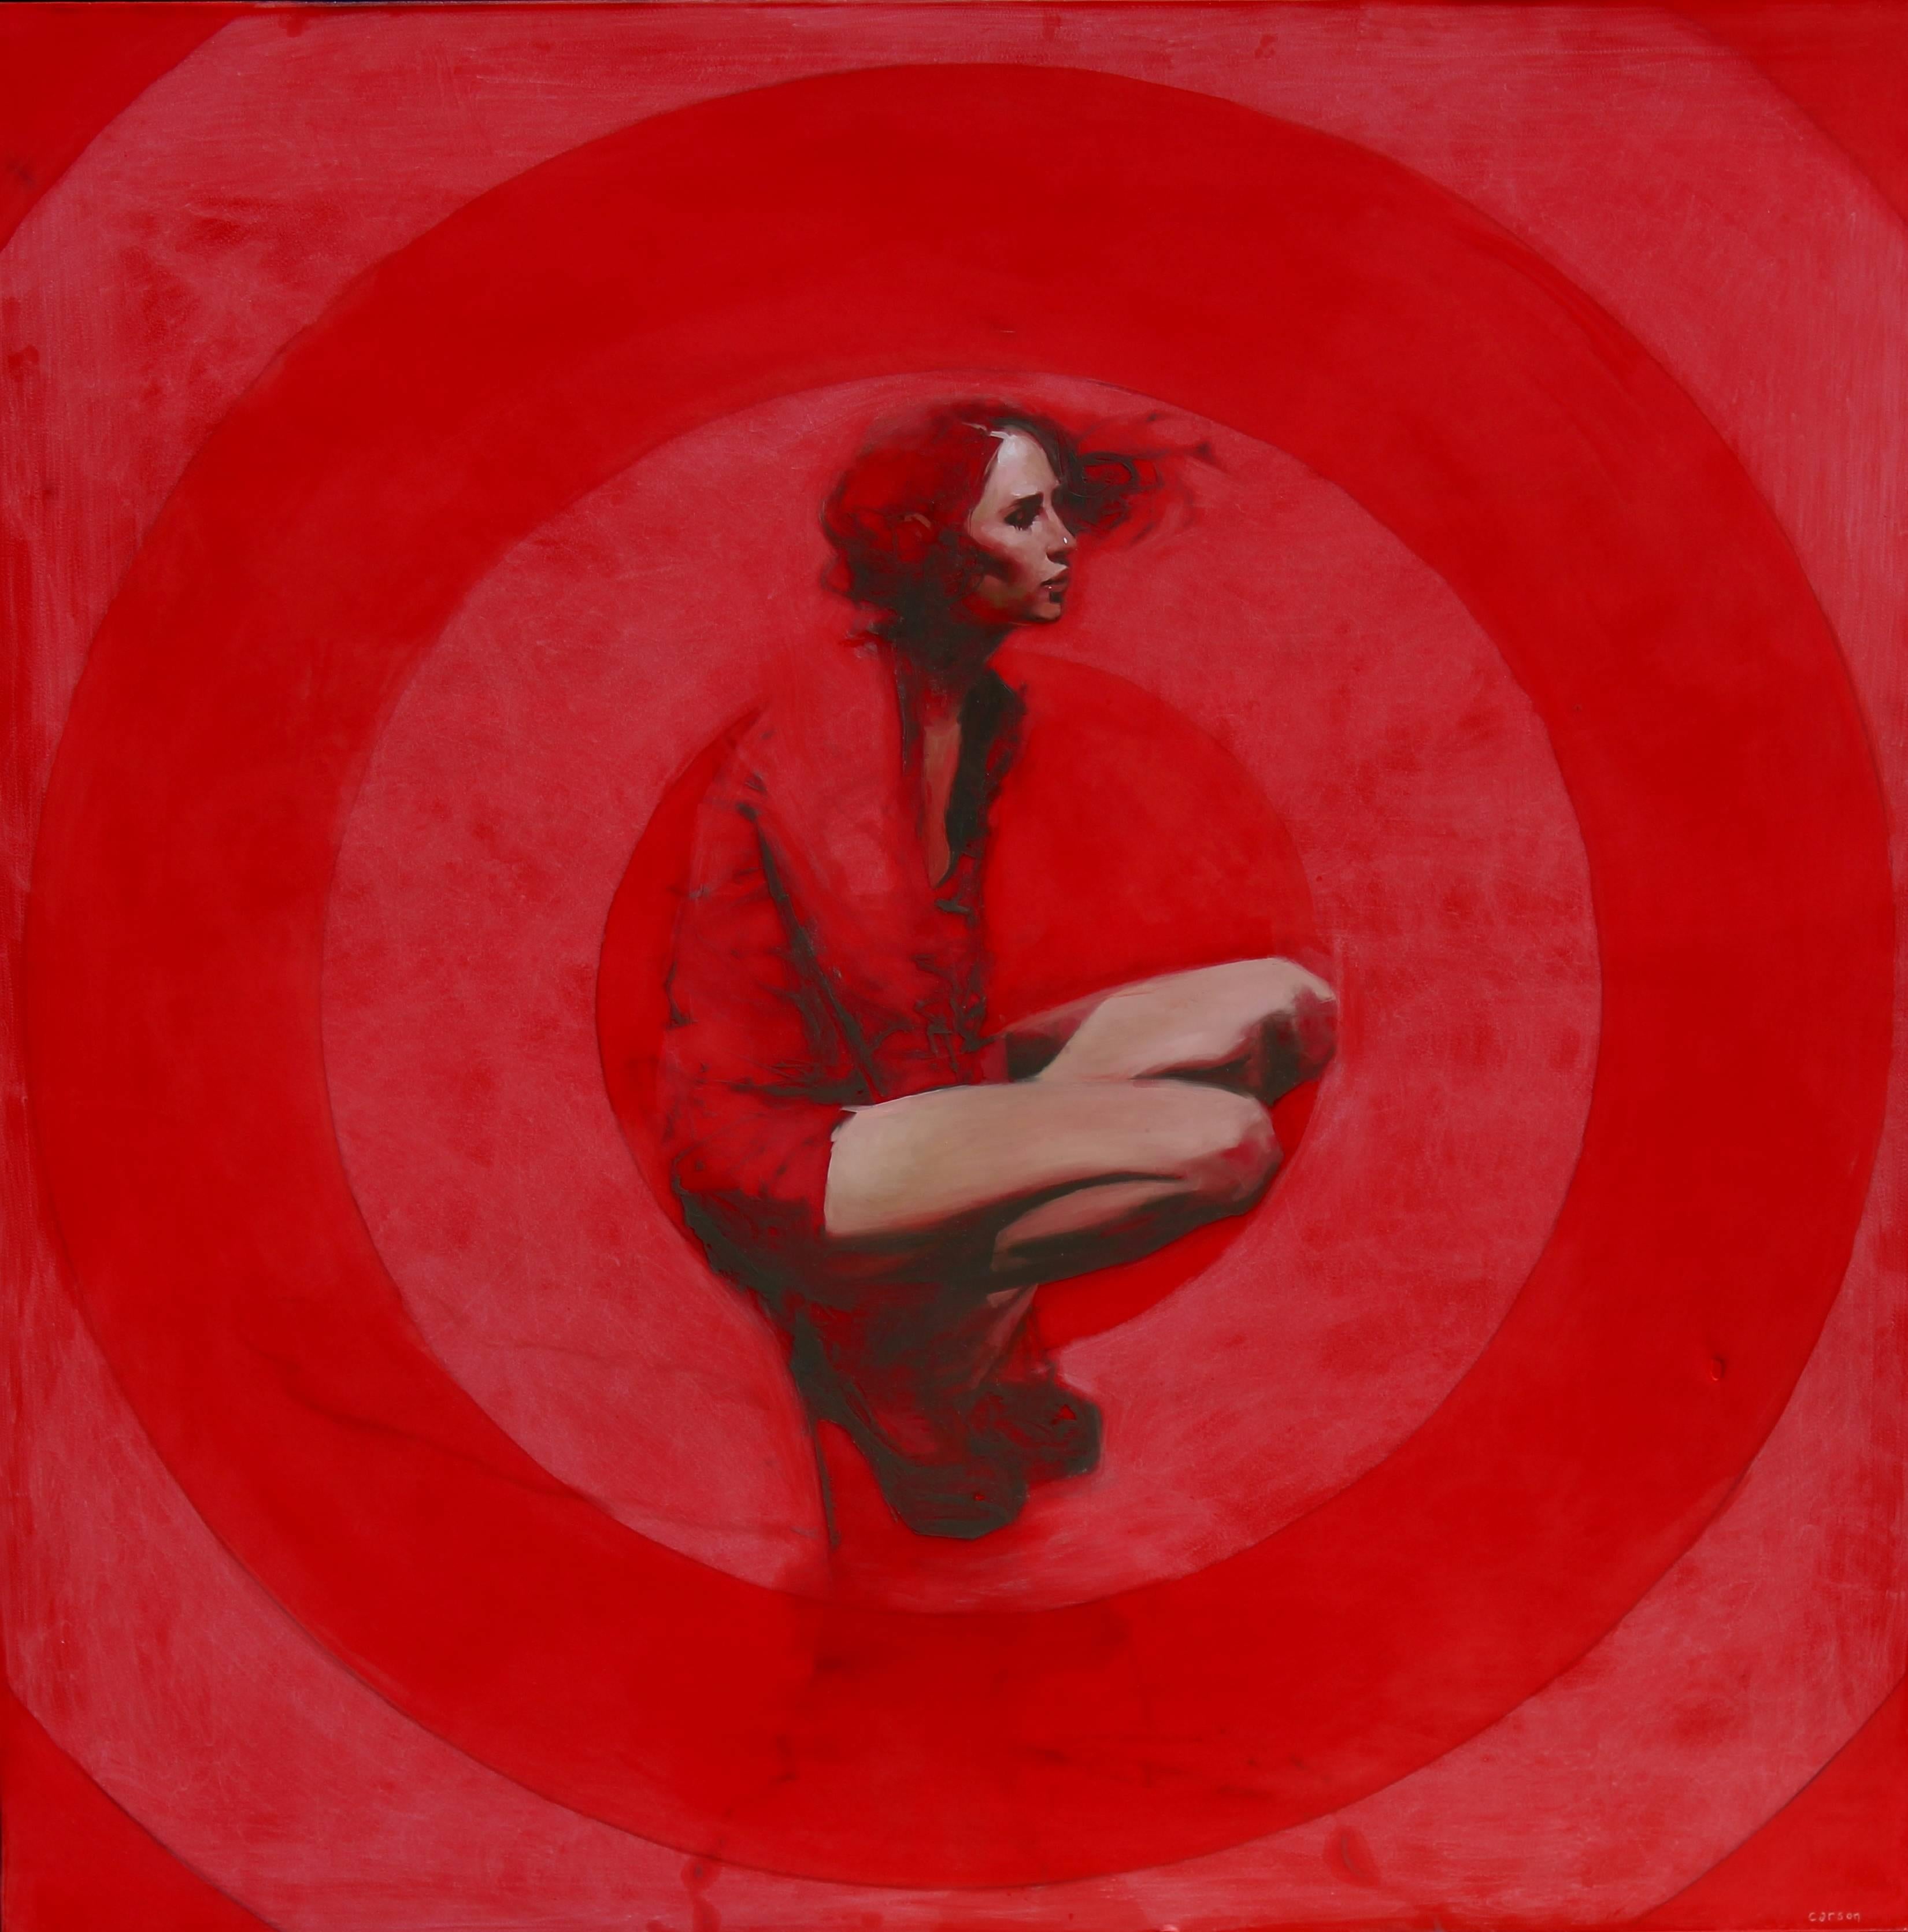 Michael Carson Figurative Painting - "Red Dot" 